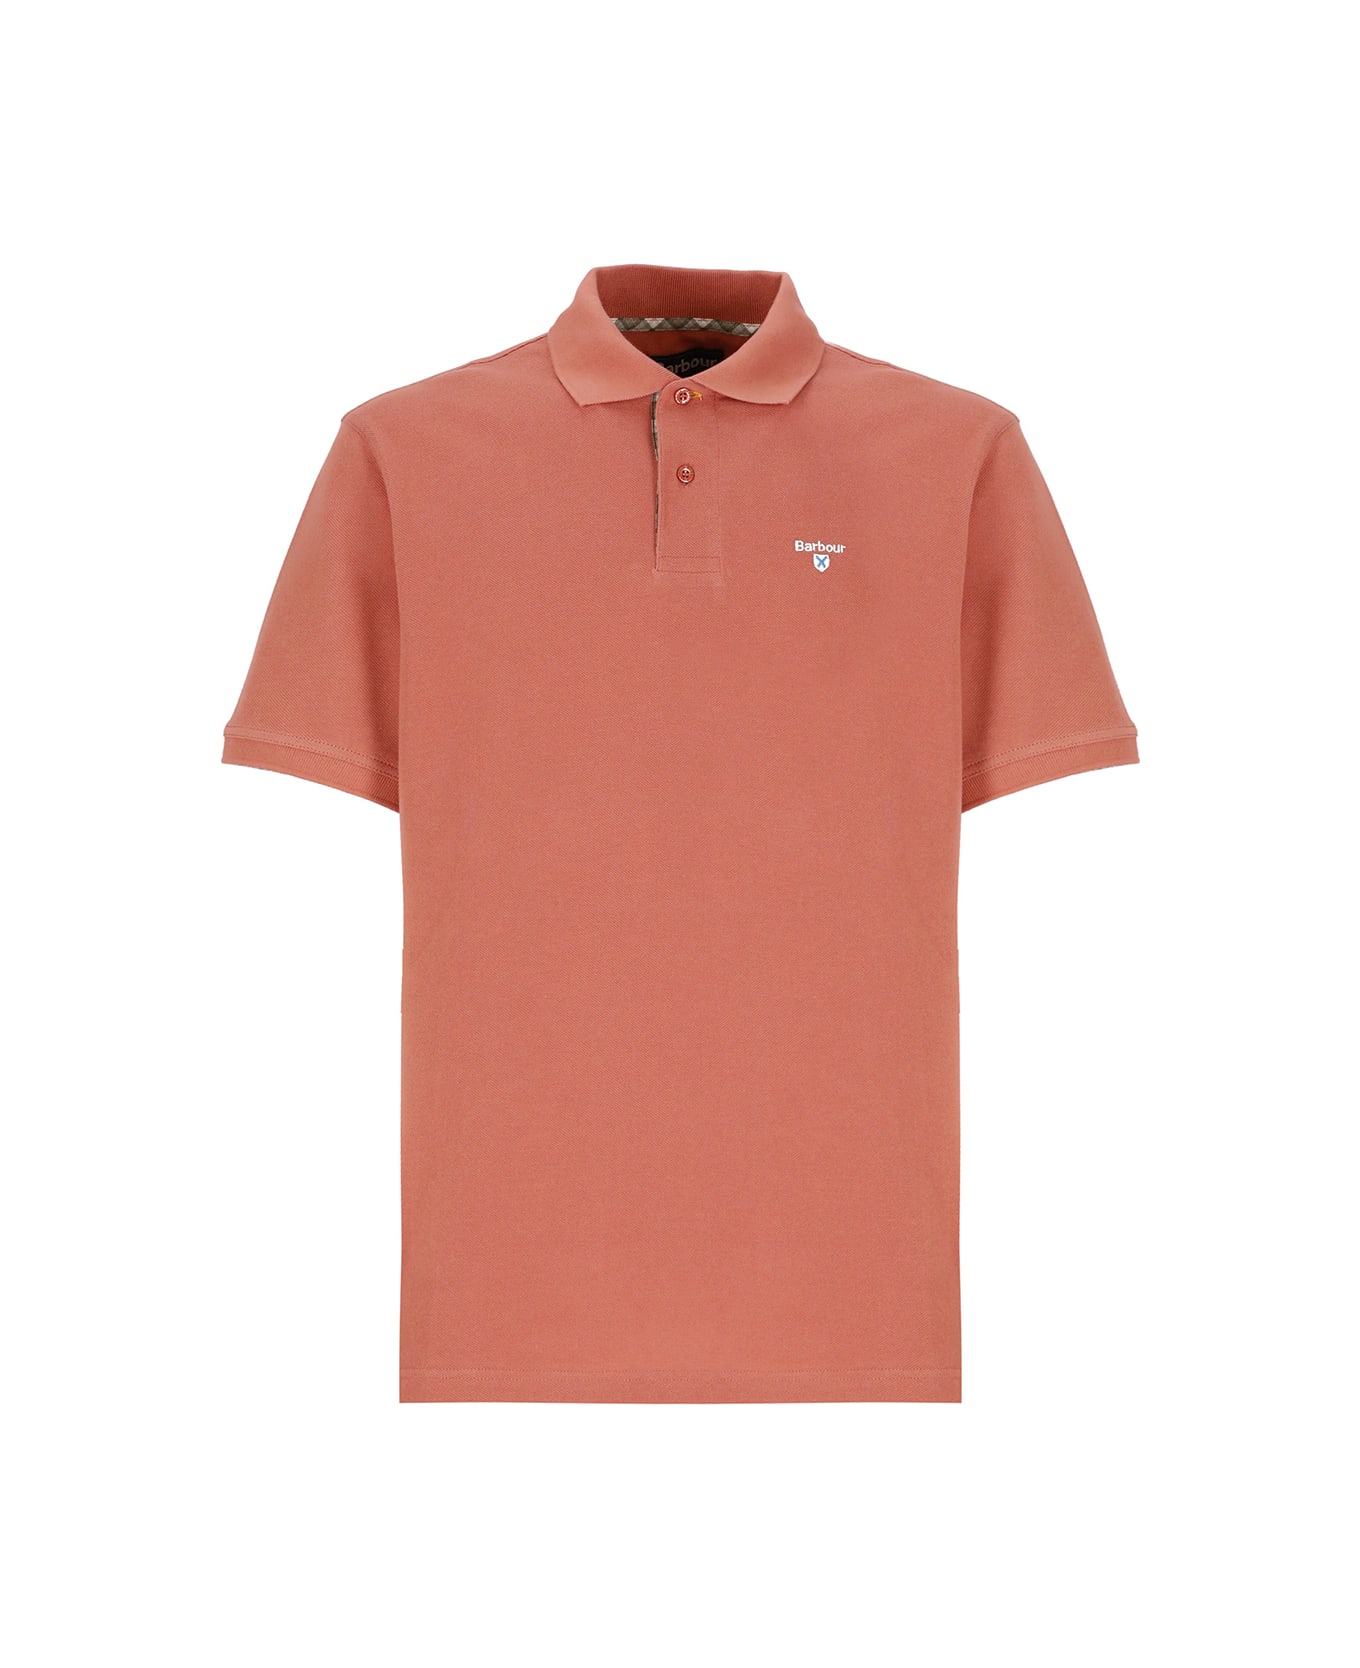 Barbour Logoed Polo Shirt - Pink ポロシャツ